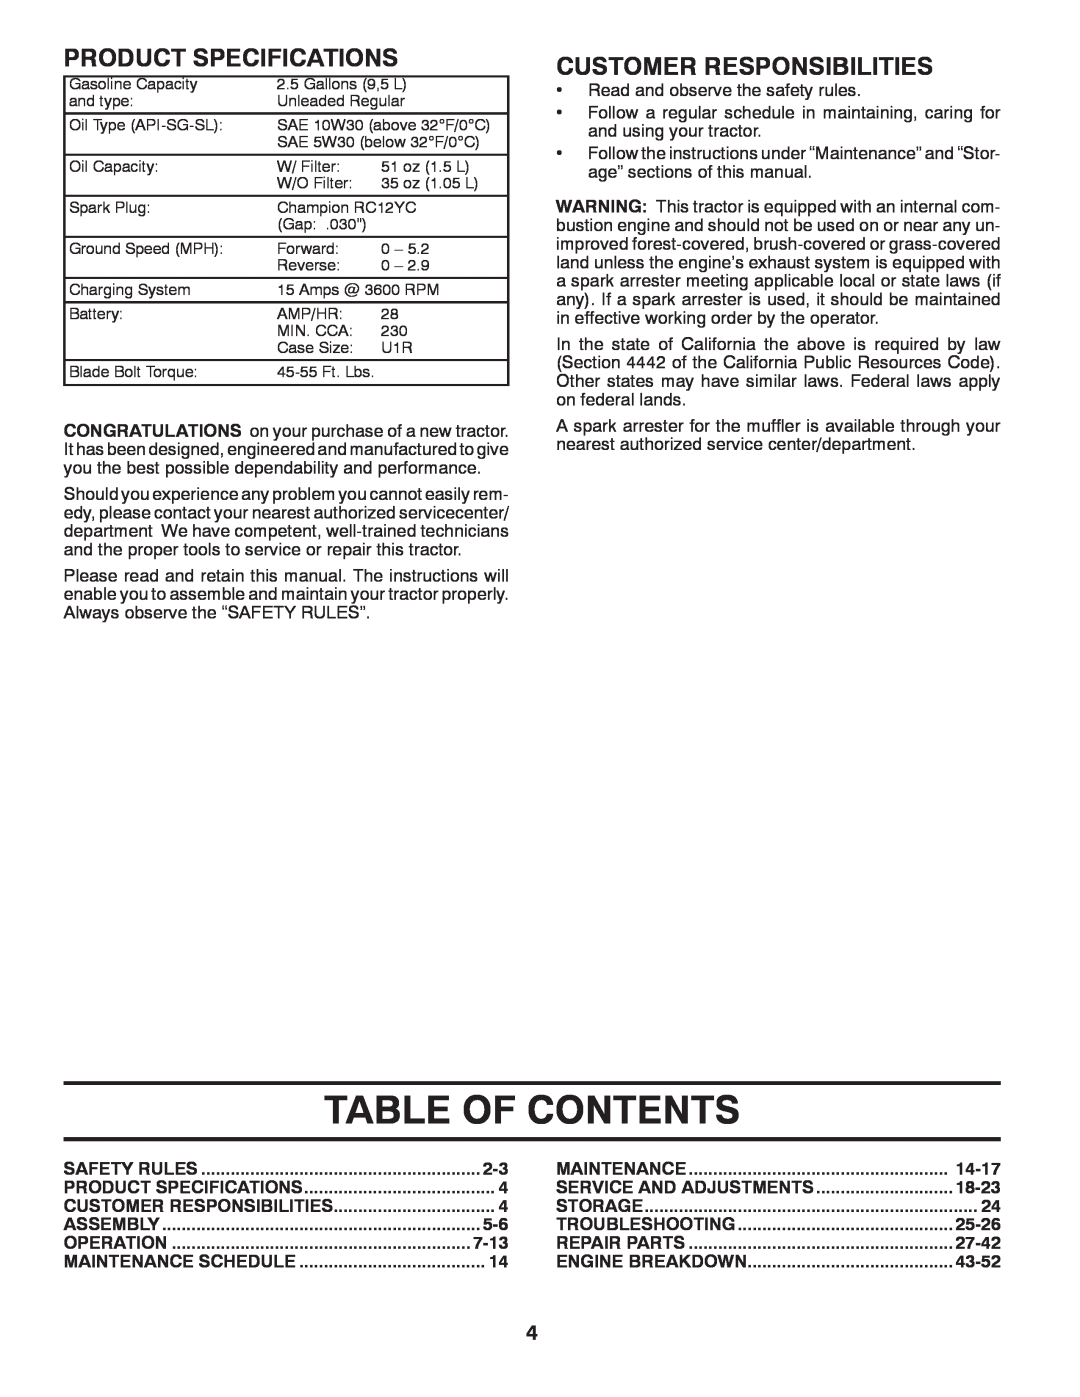 Husqvarna 917.24046 owner manual Table Of Contents, Product Specifications, Customer Responsibilities 